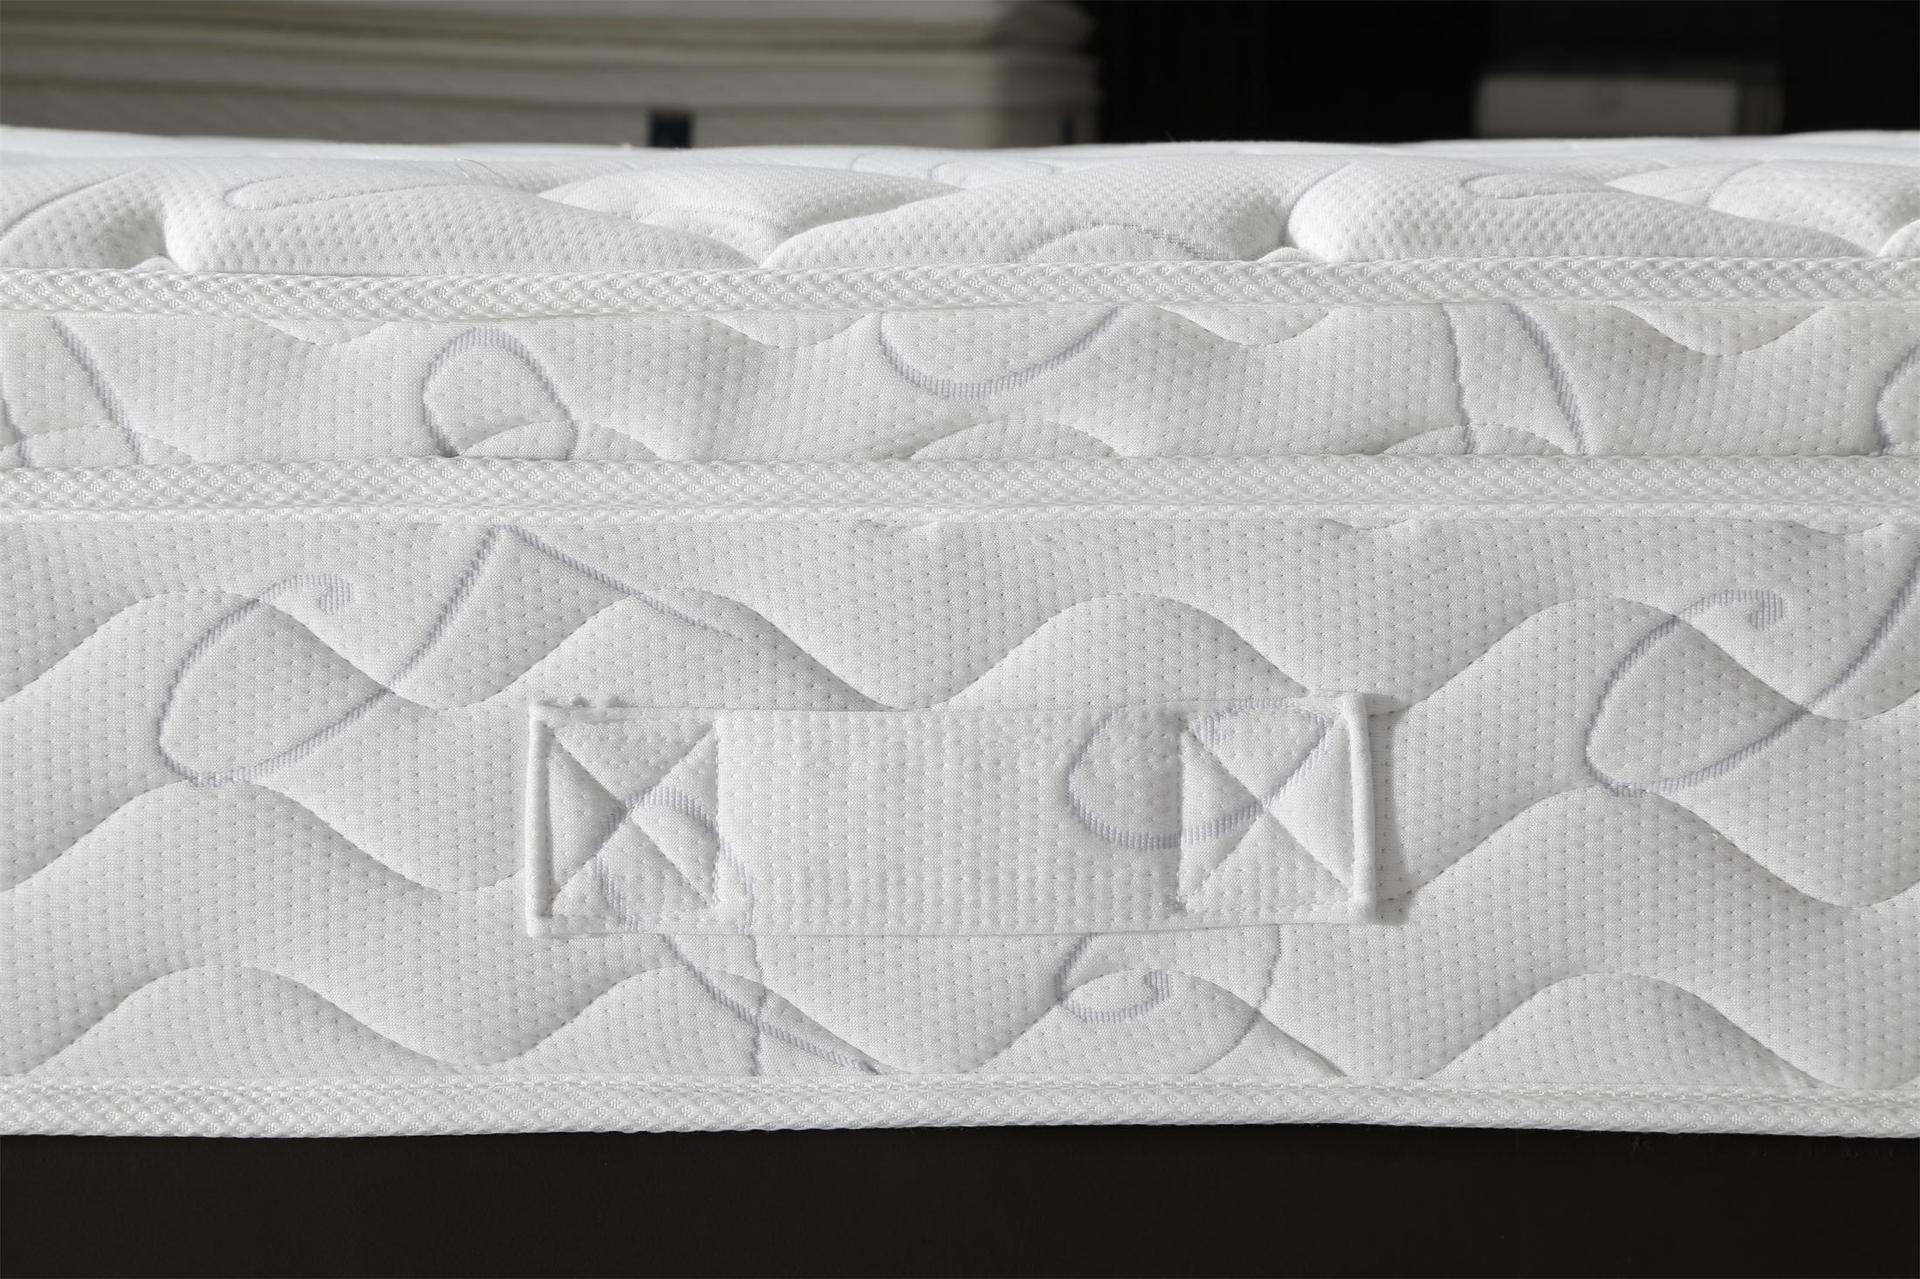 34CA-06 Continuous Spring Full-Size Mattress For Hotel Using With Euro Top Design